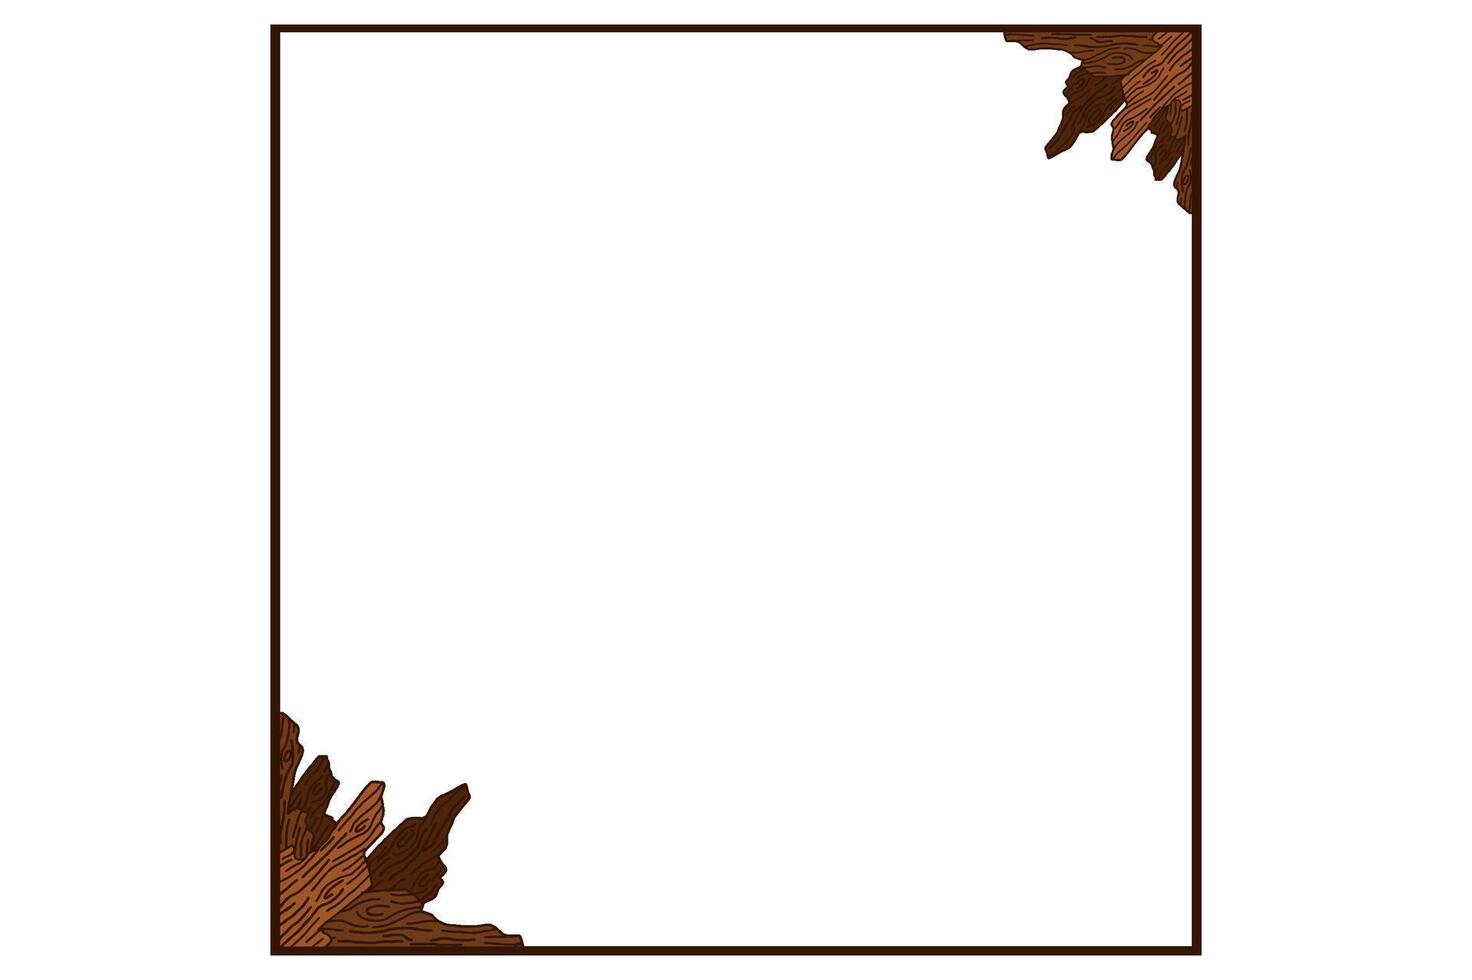 Tree Trunk Ornament Frame Border For Decoration Nature Theme vector